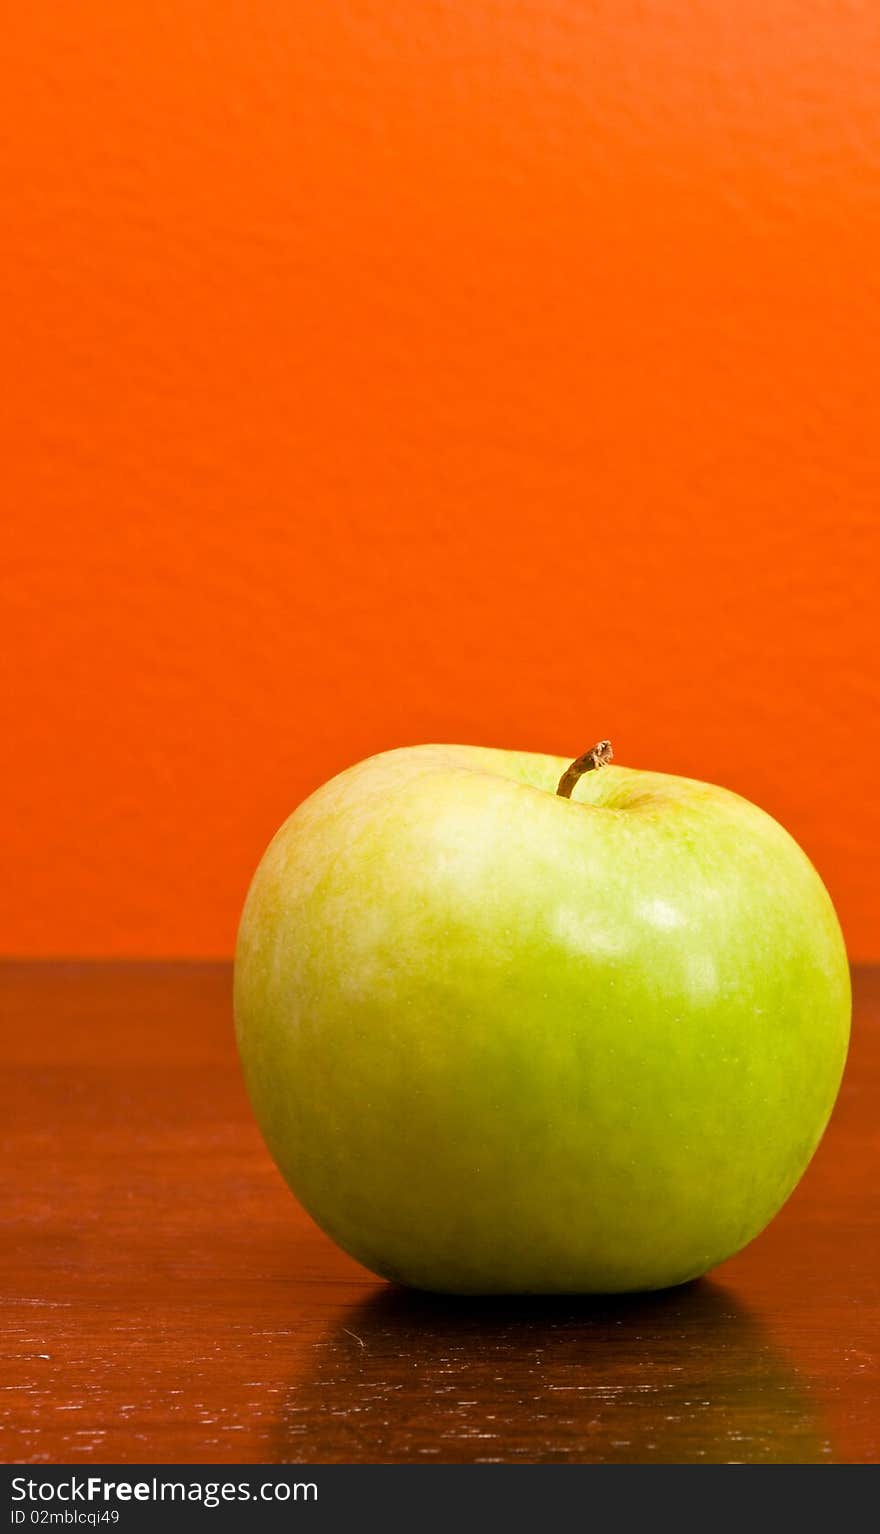 A delicious ripe green apple against an orange background. A delicious ripe green apple against an orange background.